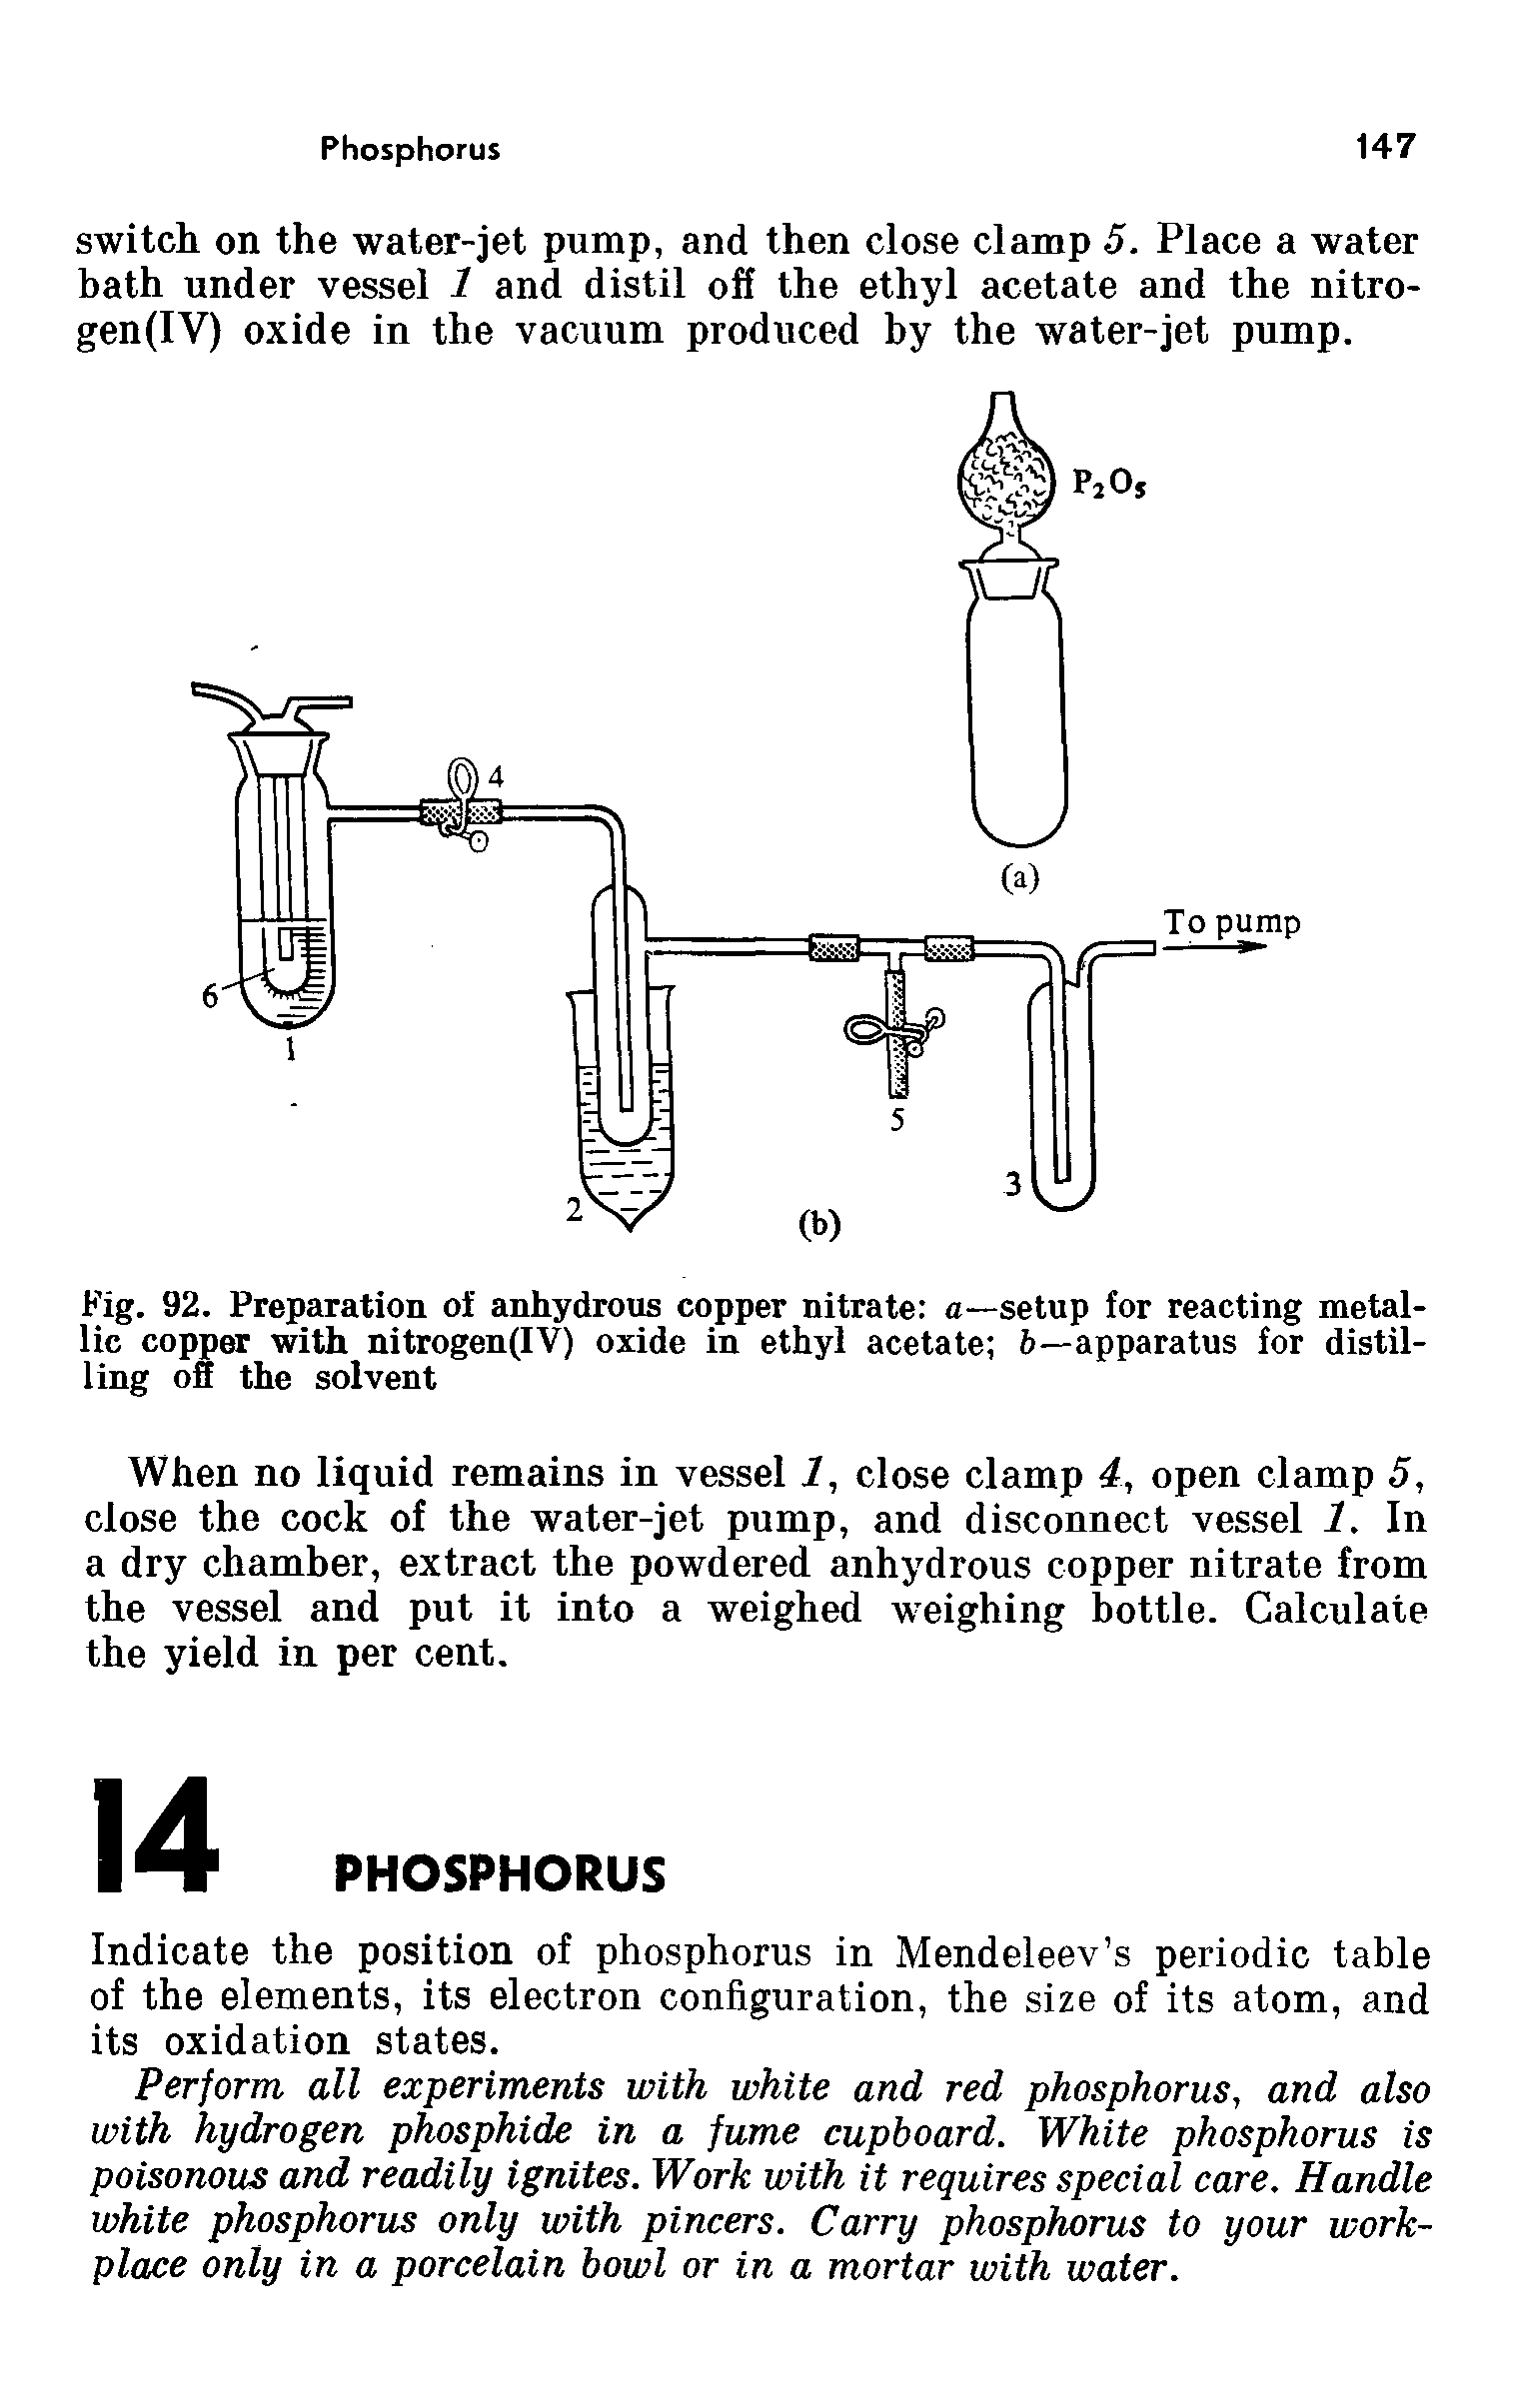 Fig. 92. Preparation of anhydrous copper nitrate a—setup for reacting metallic copper with nitrogen(IV) oxide in ethyl acetate 6—apparatus for distilling off the solvent...